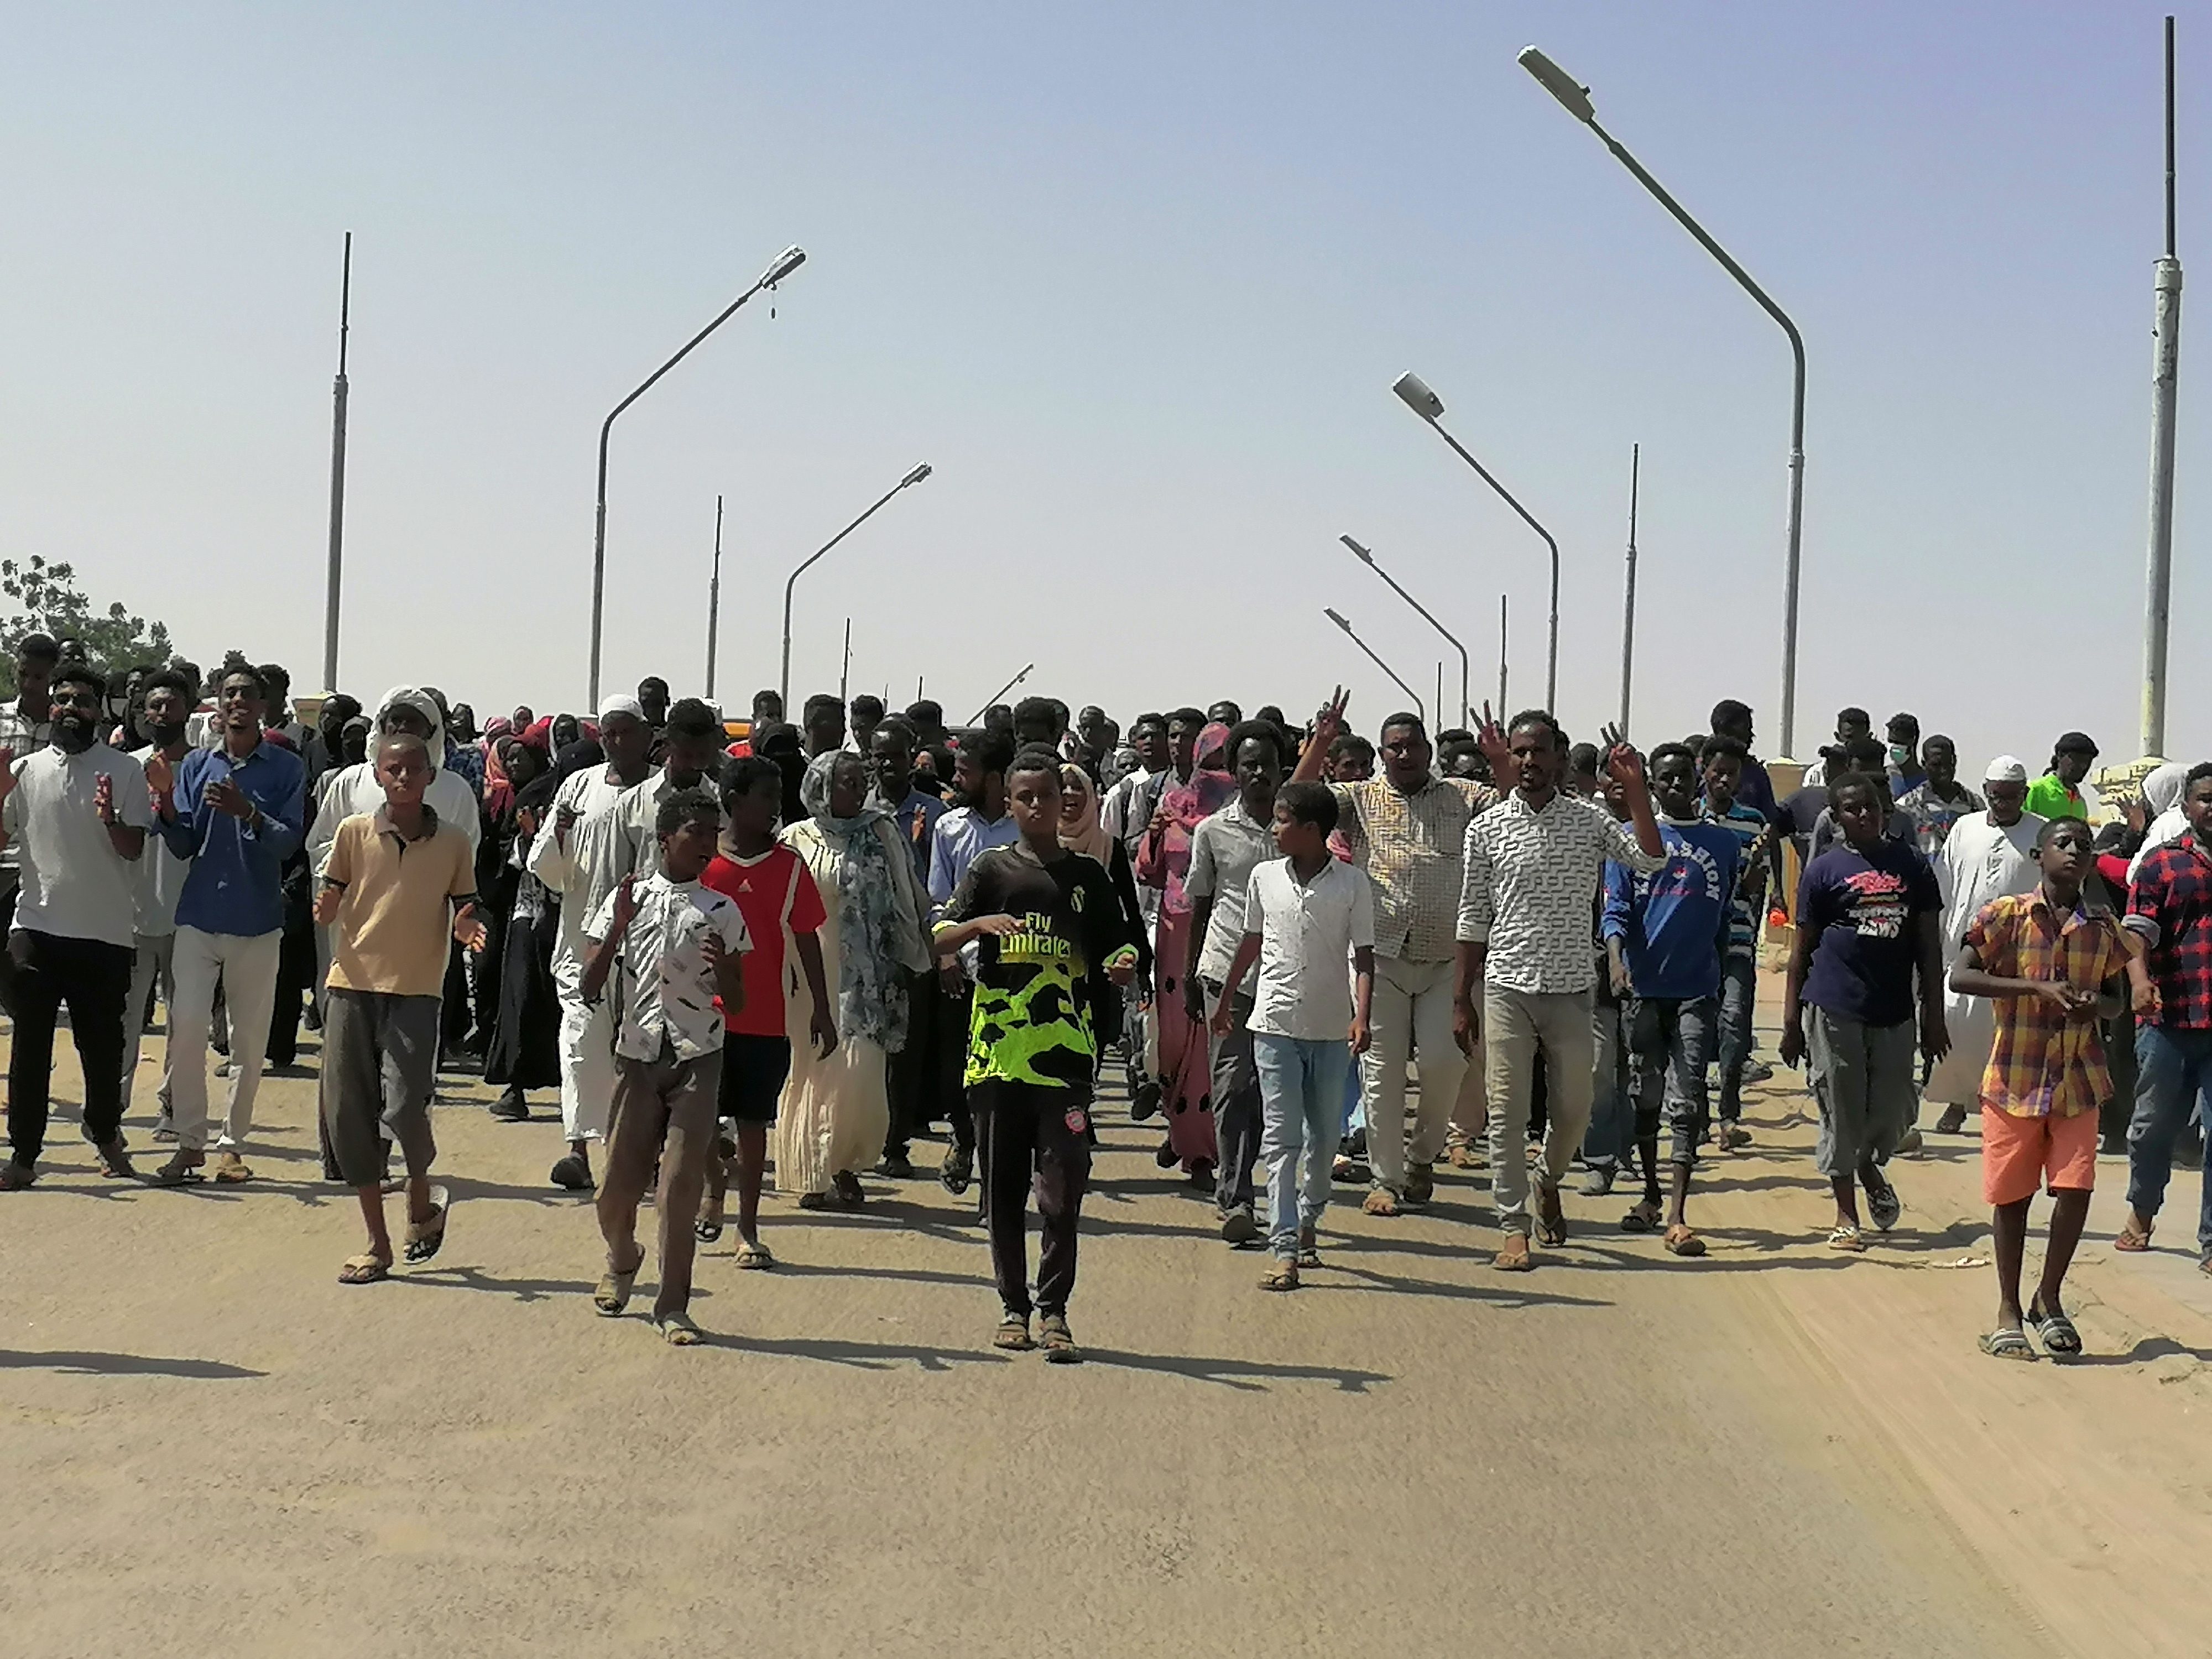 US urges Sudan military to refrain from violence against planned protests – official